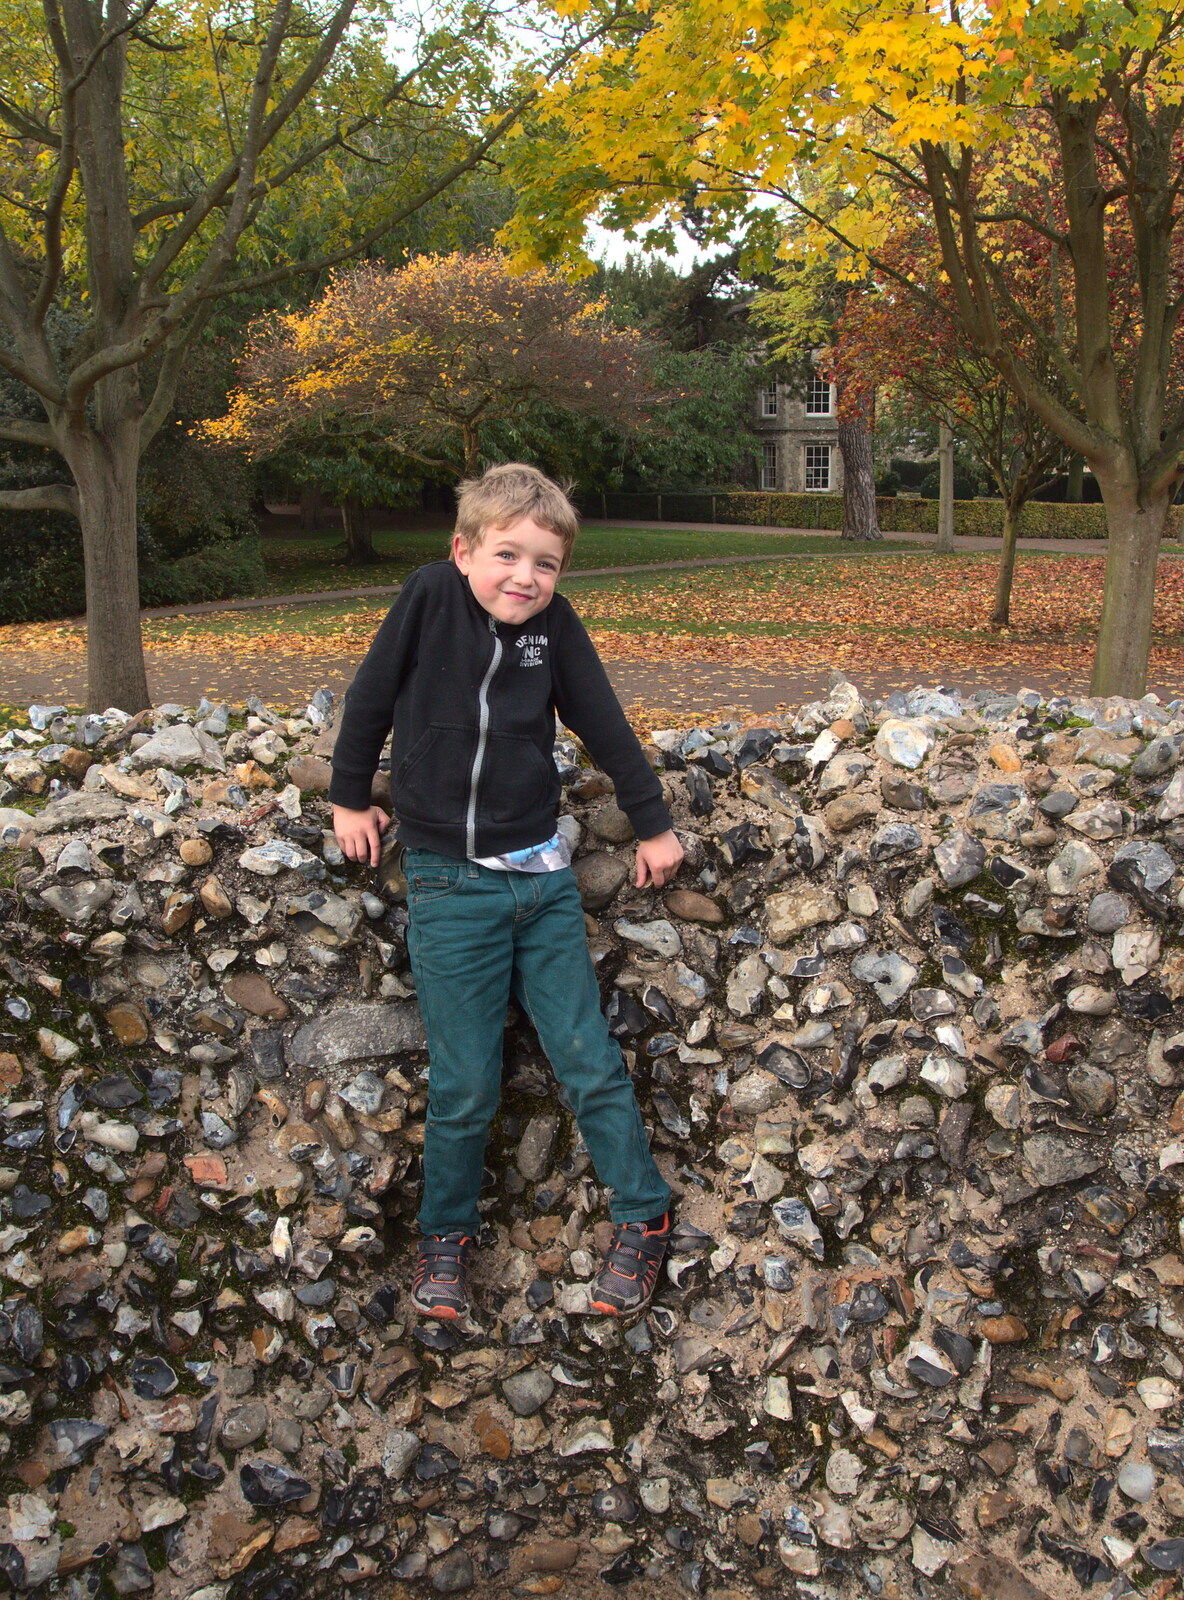 Fred on a wall from Abbey Gardens in Autumn, Bury St. Edmunds, Suffolk - 27th October 2015